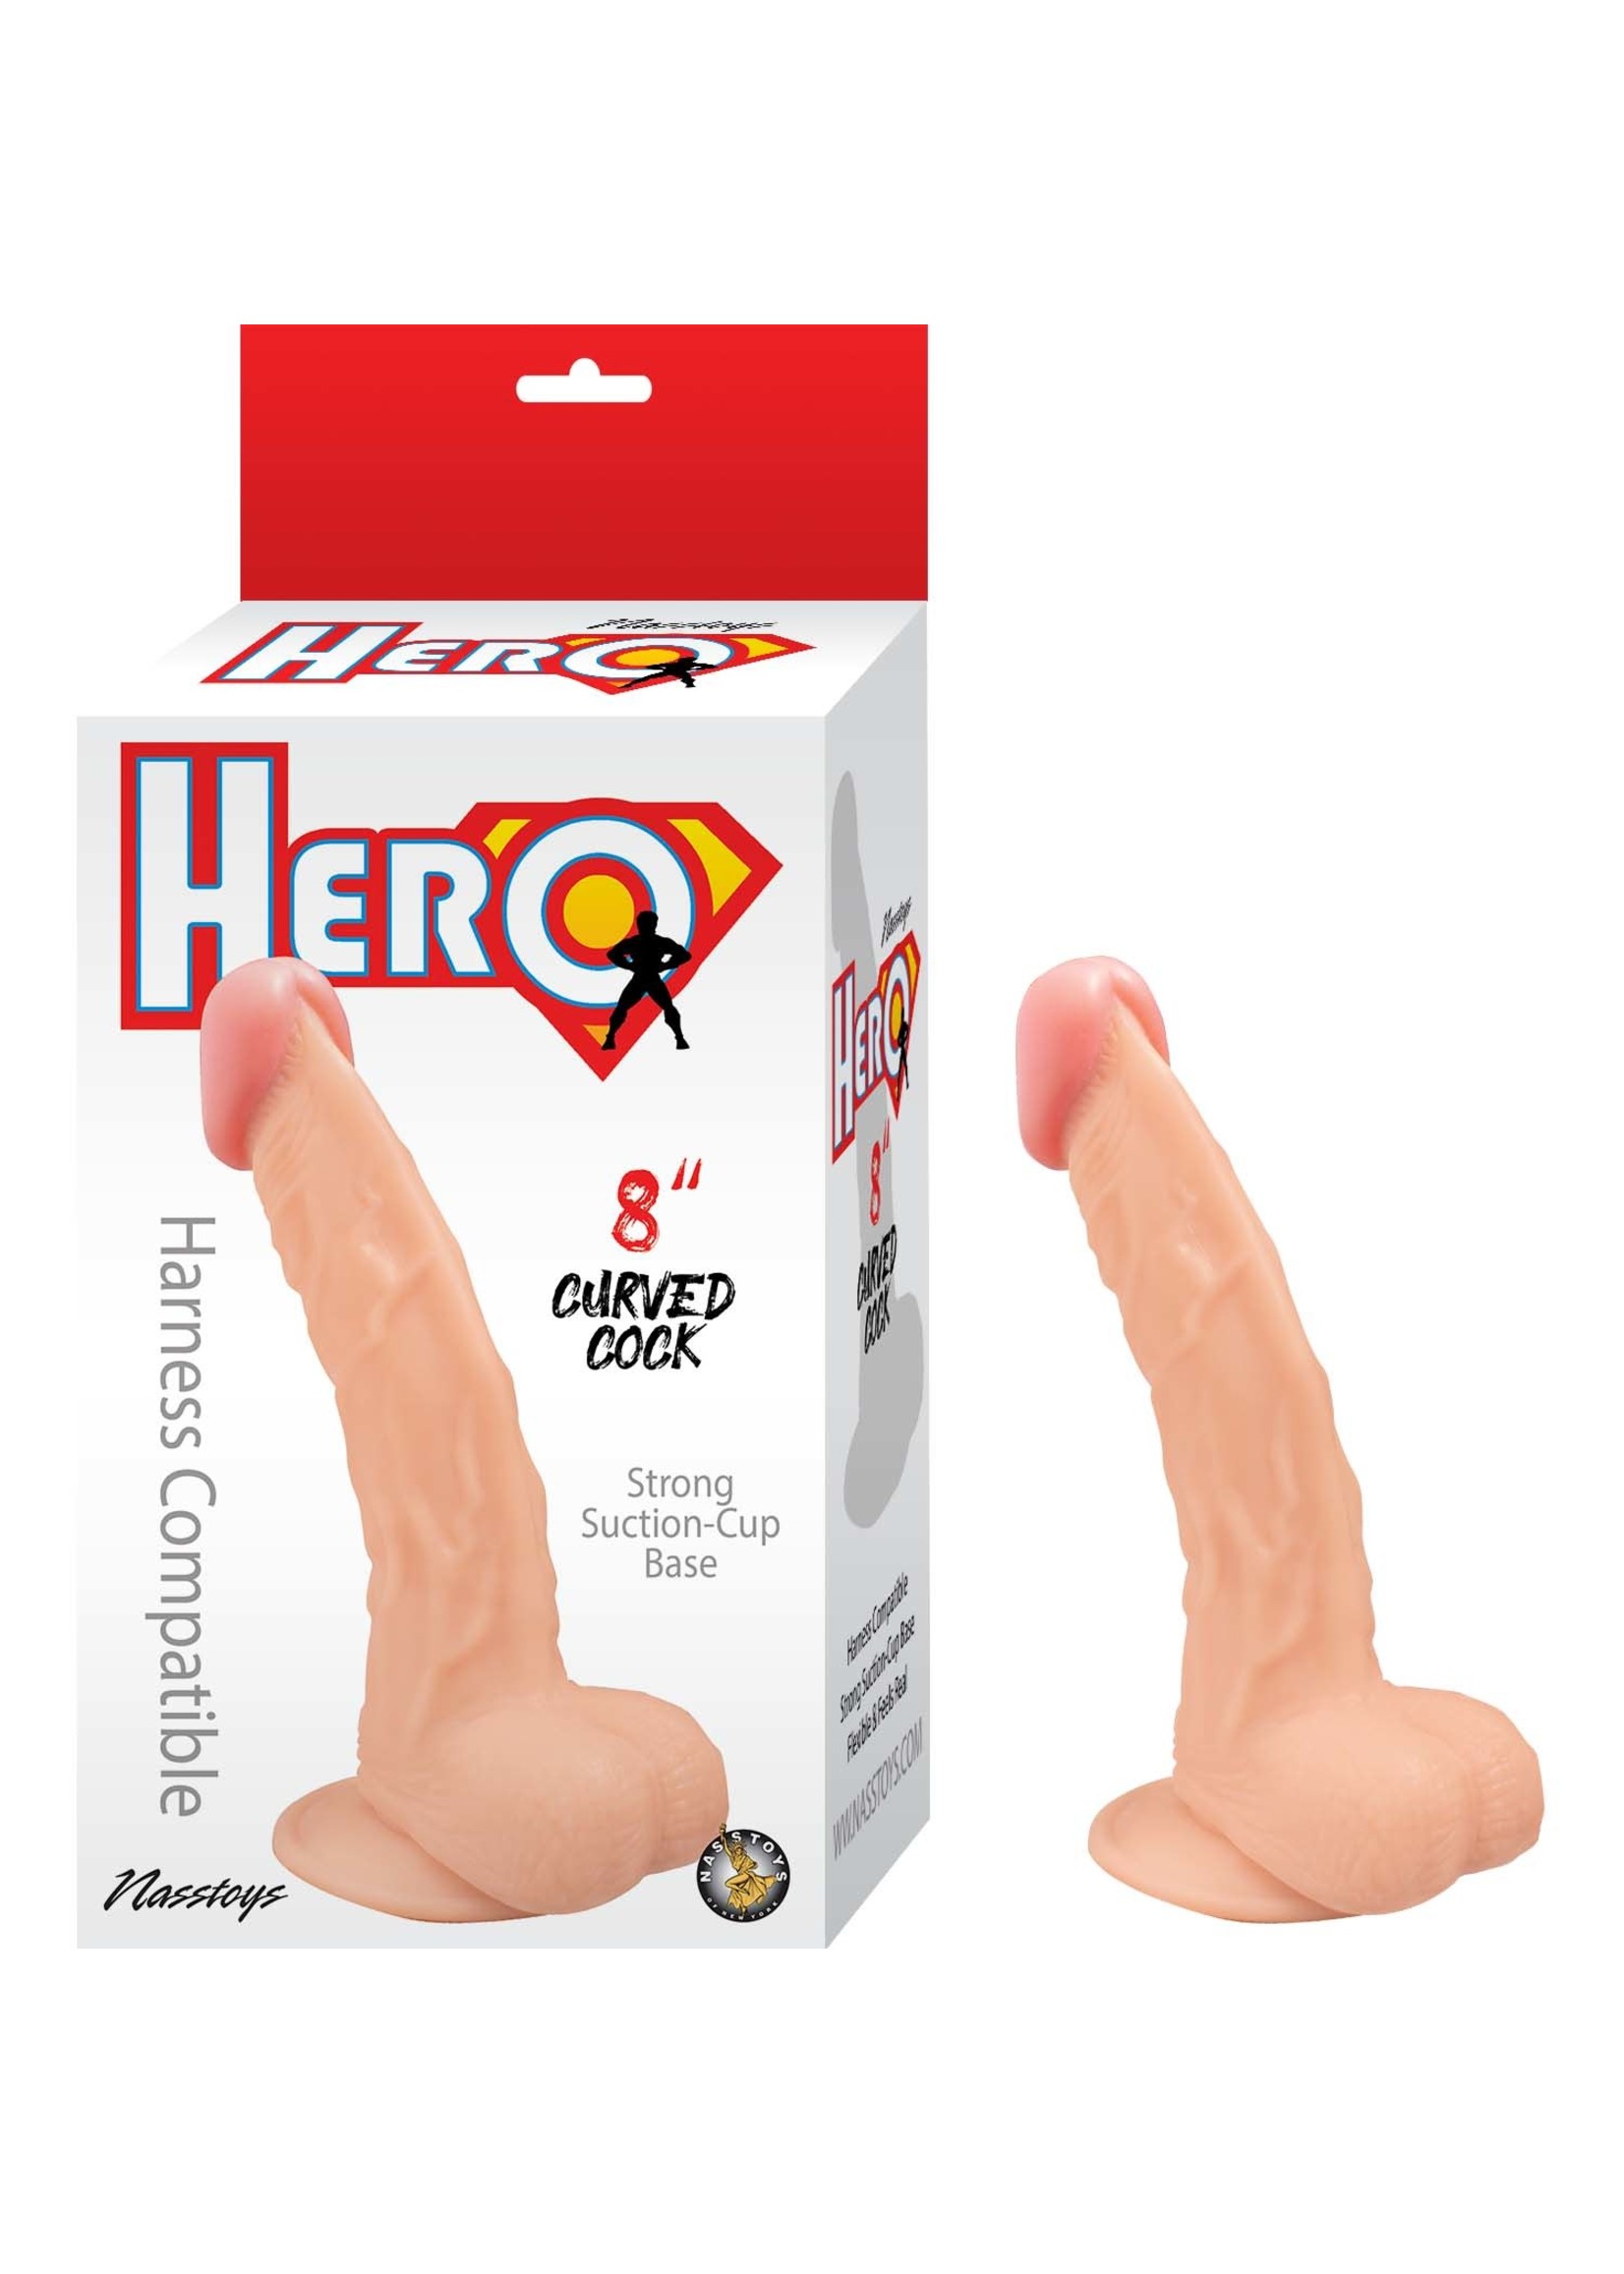 Nasstoys Hero 8″ Curved Cock